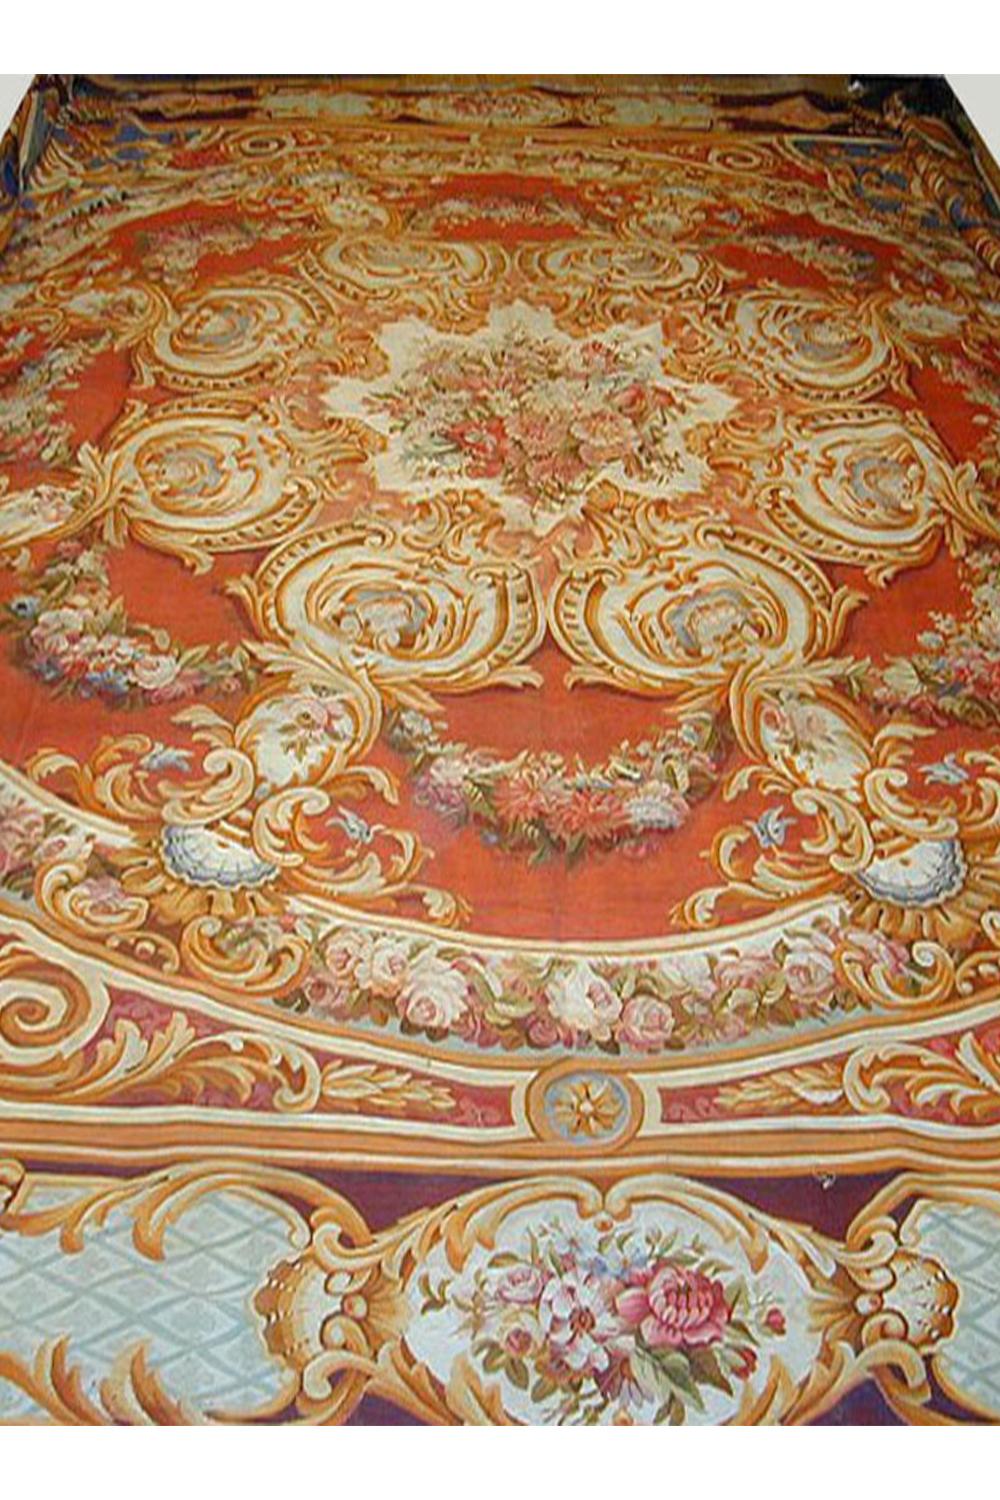 Oversize antique French Aubusson rug 15'5 x 18'. The Aubusson carpets of the second Empire period are often more elaborate and accomplished than their 18th century predecessors. The richness and complexity of ornaments is almost indescribable. The